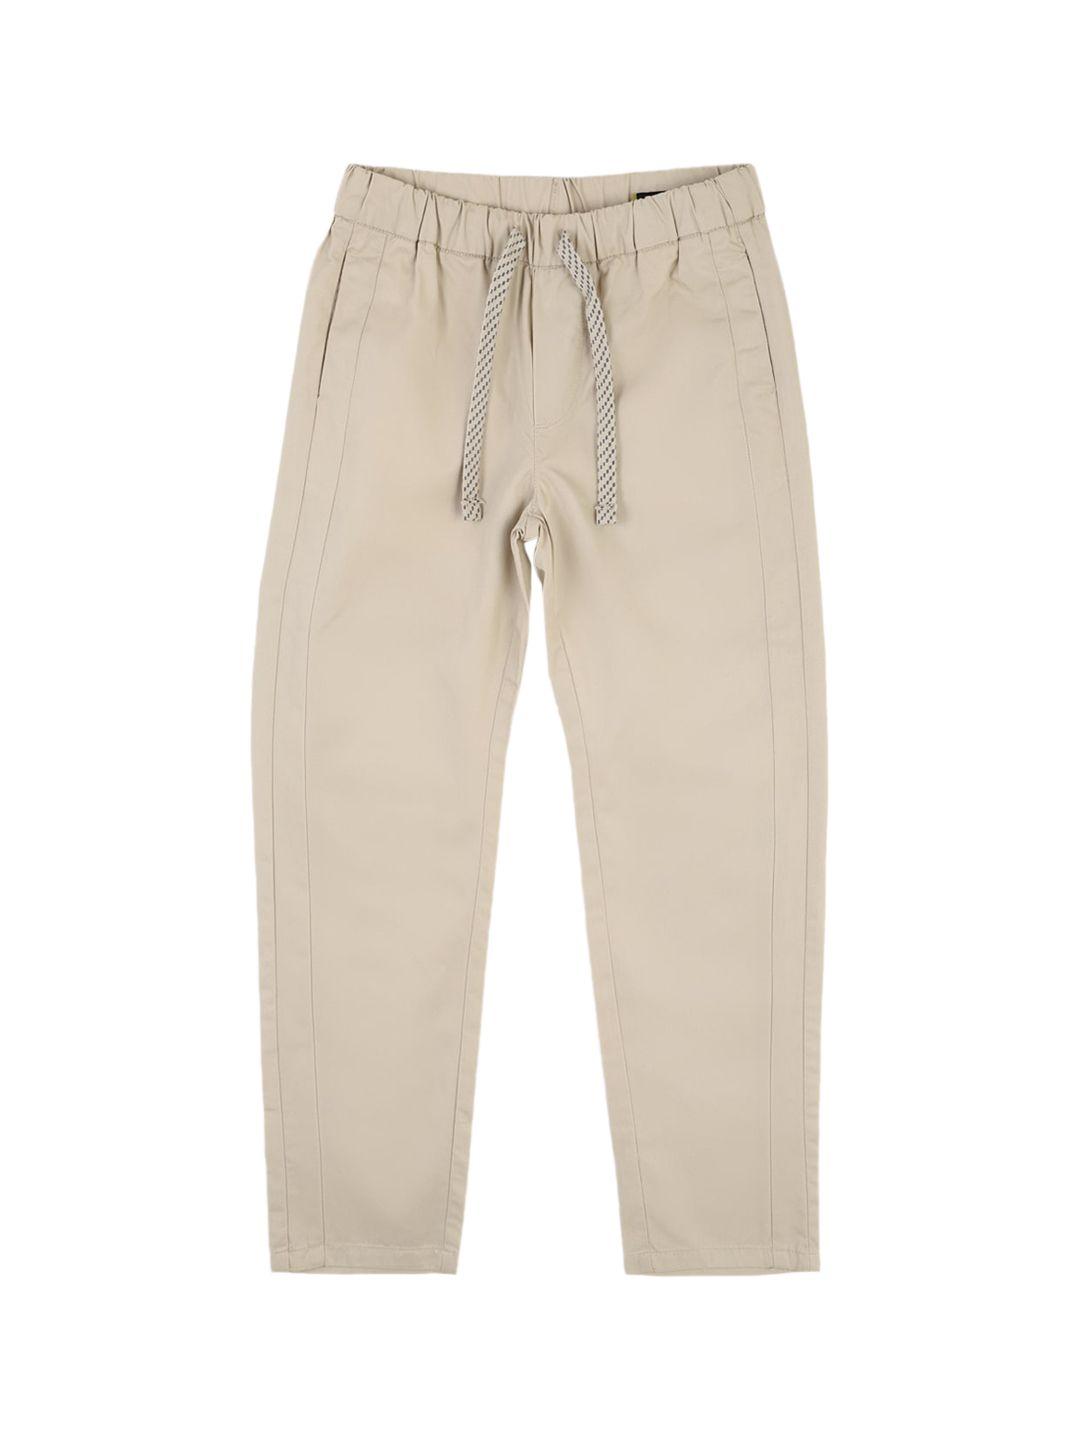 allen solly junior boys slim fit mid-rise trousers